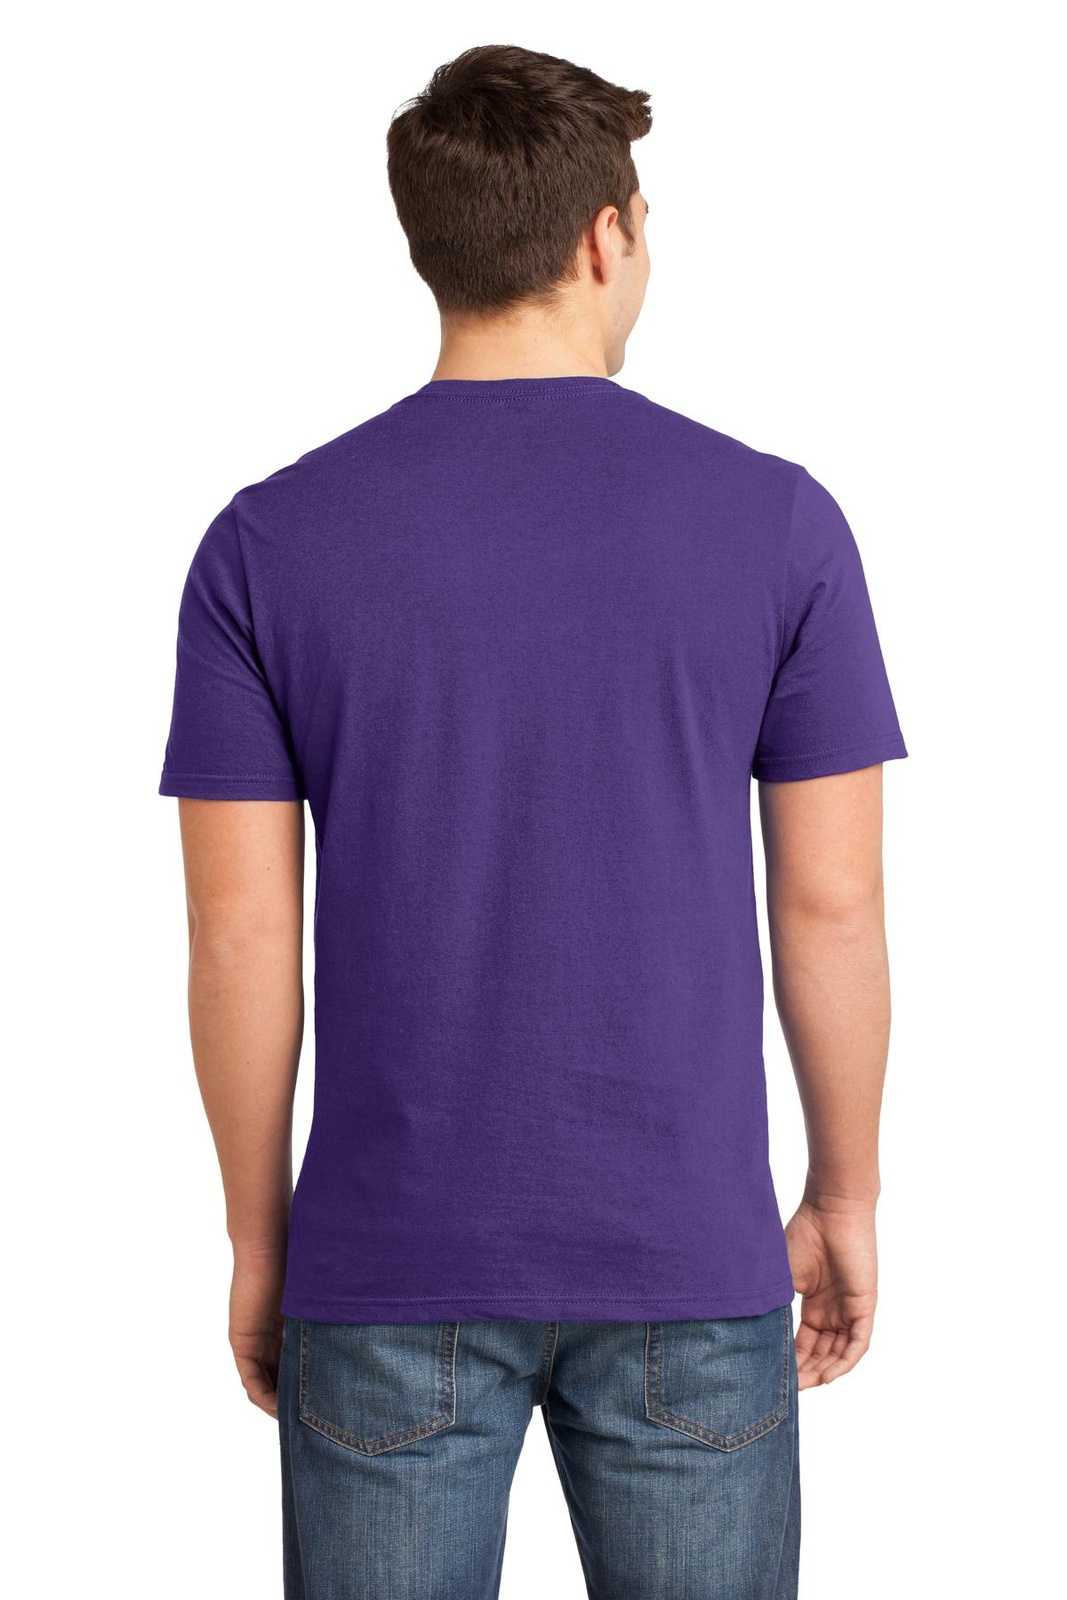 District DT6000 Very Important Tee - Purple - HIT a Double - 2